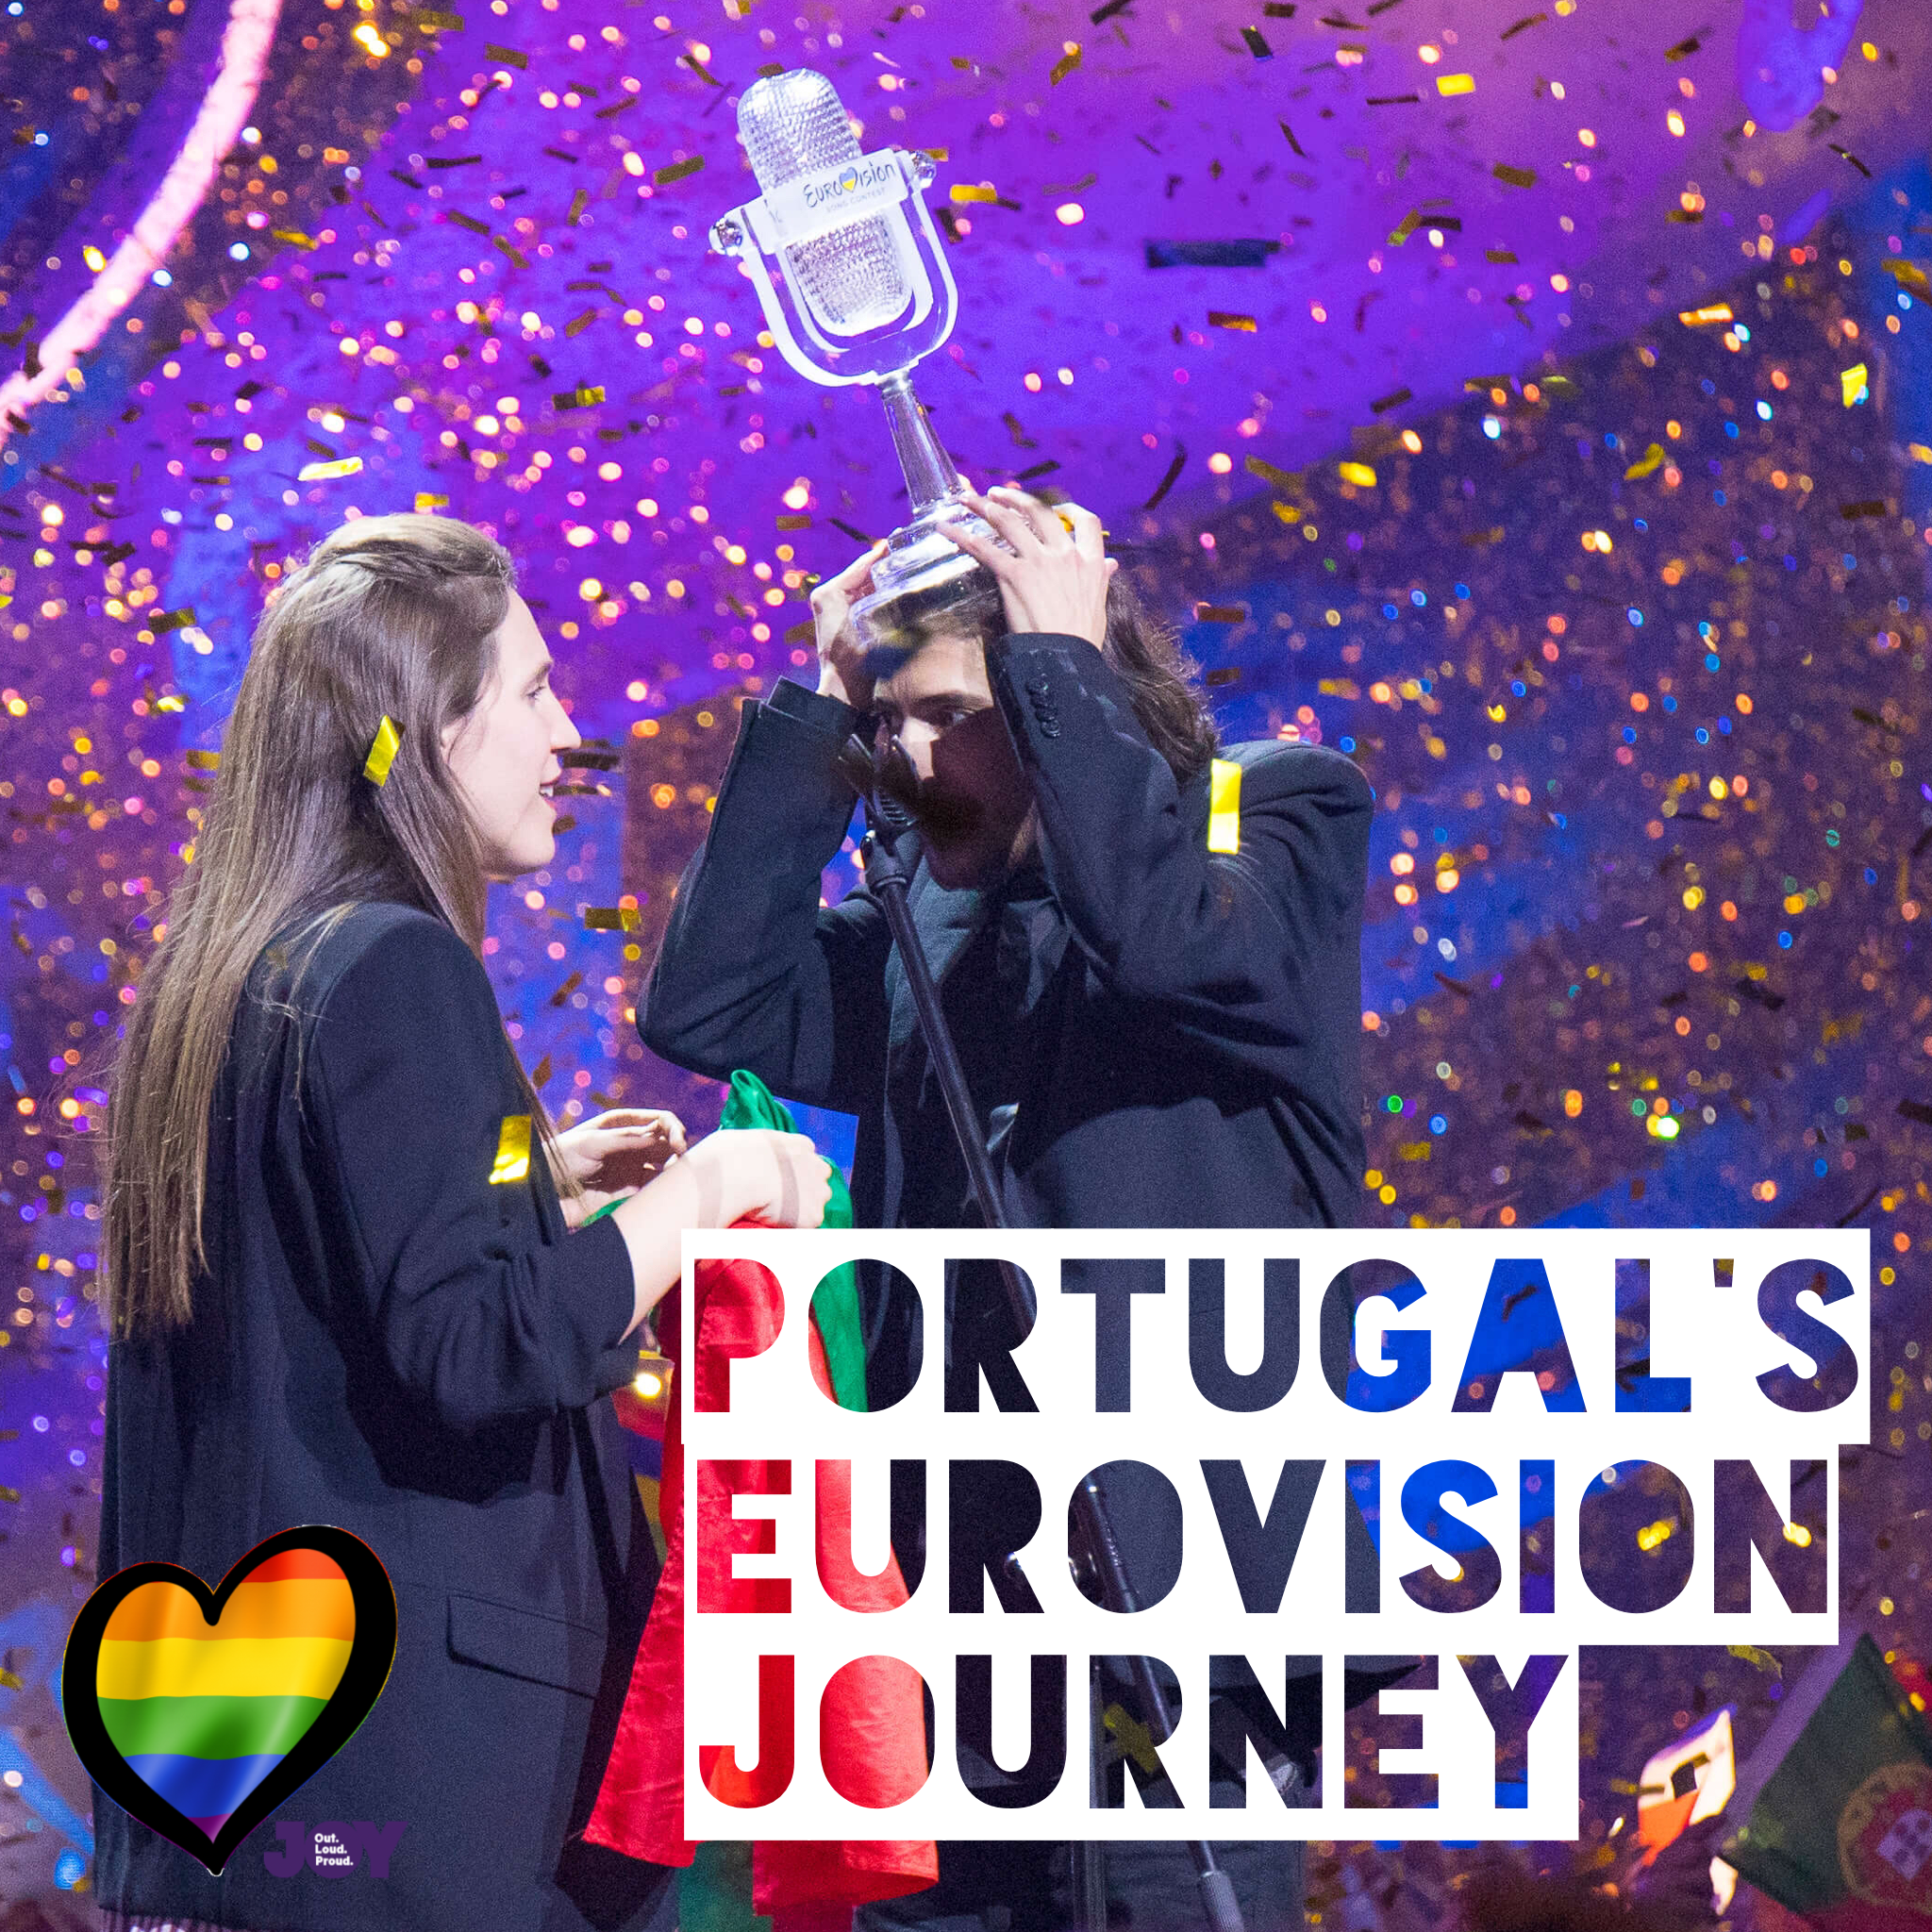 From António to Salvador: Portugal’s Eurovision journey